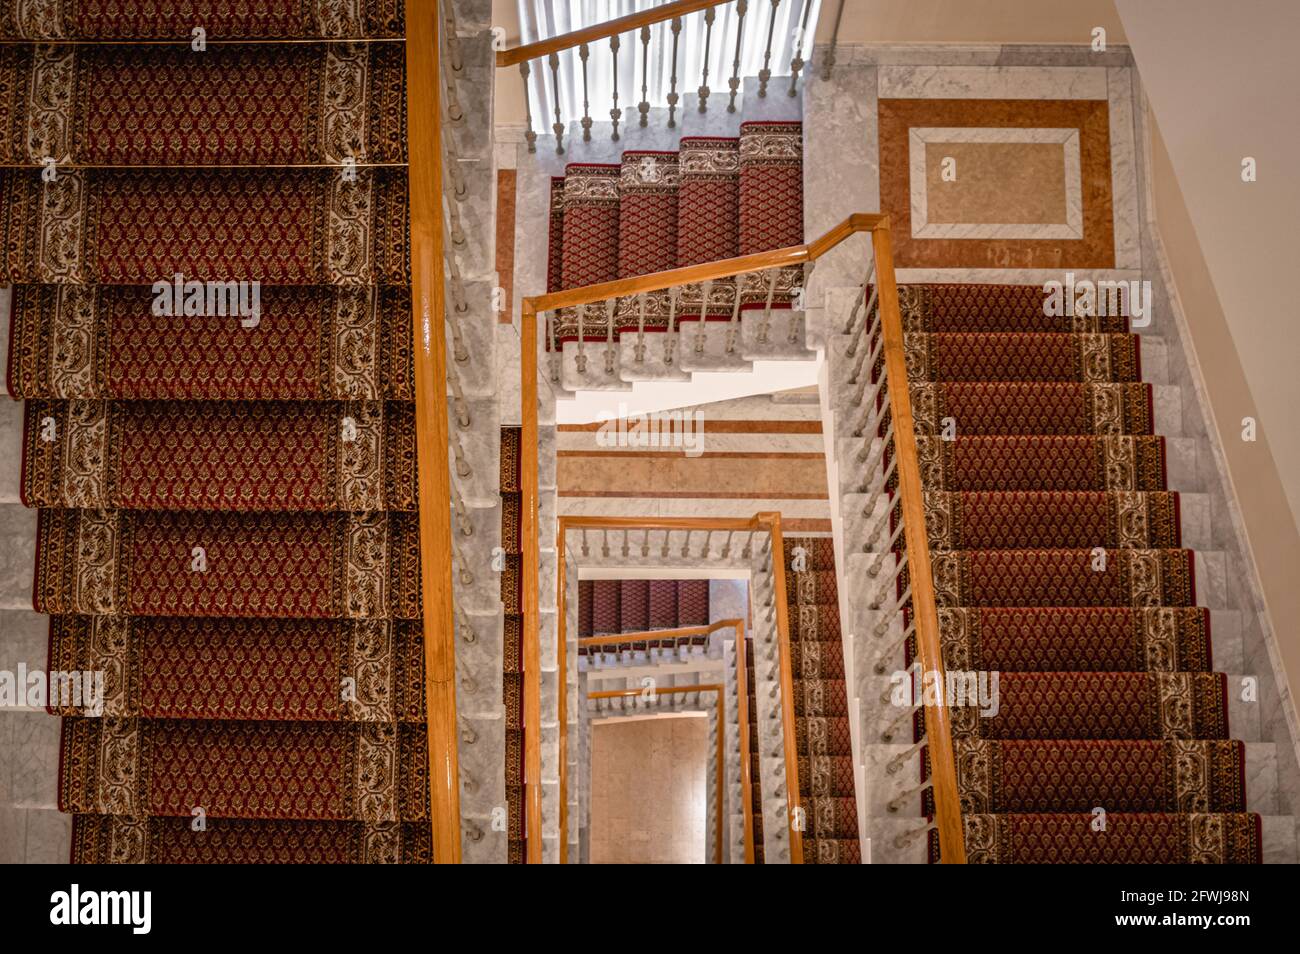 Downward view of spiral staircase with several flights decorated with carpets. Stock Photo